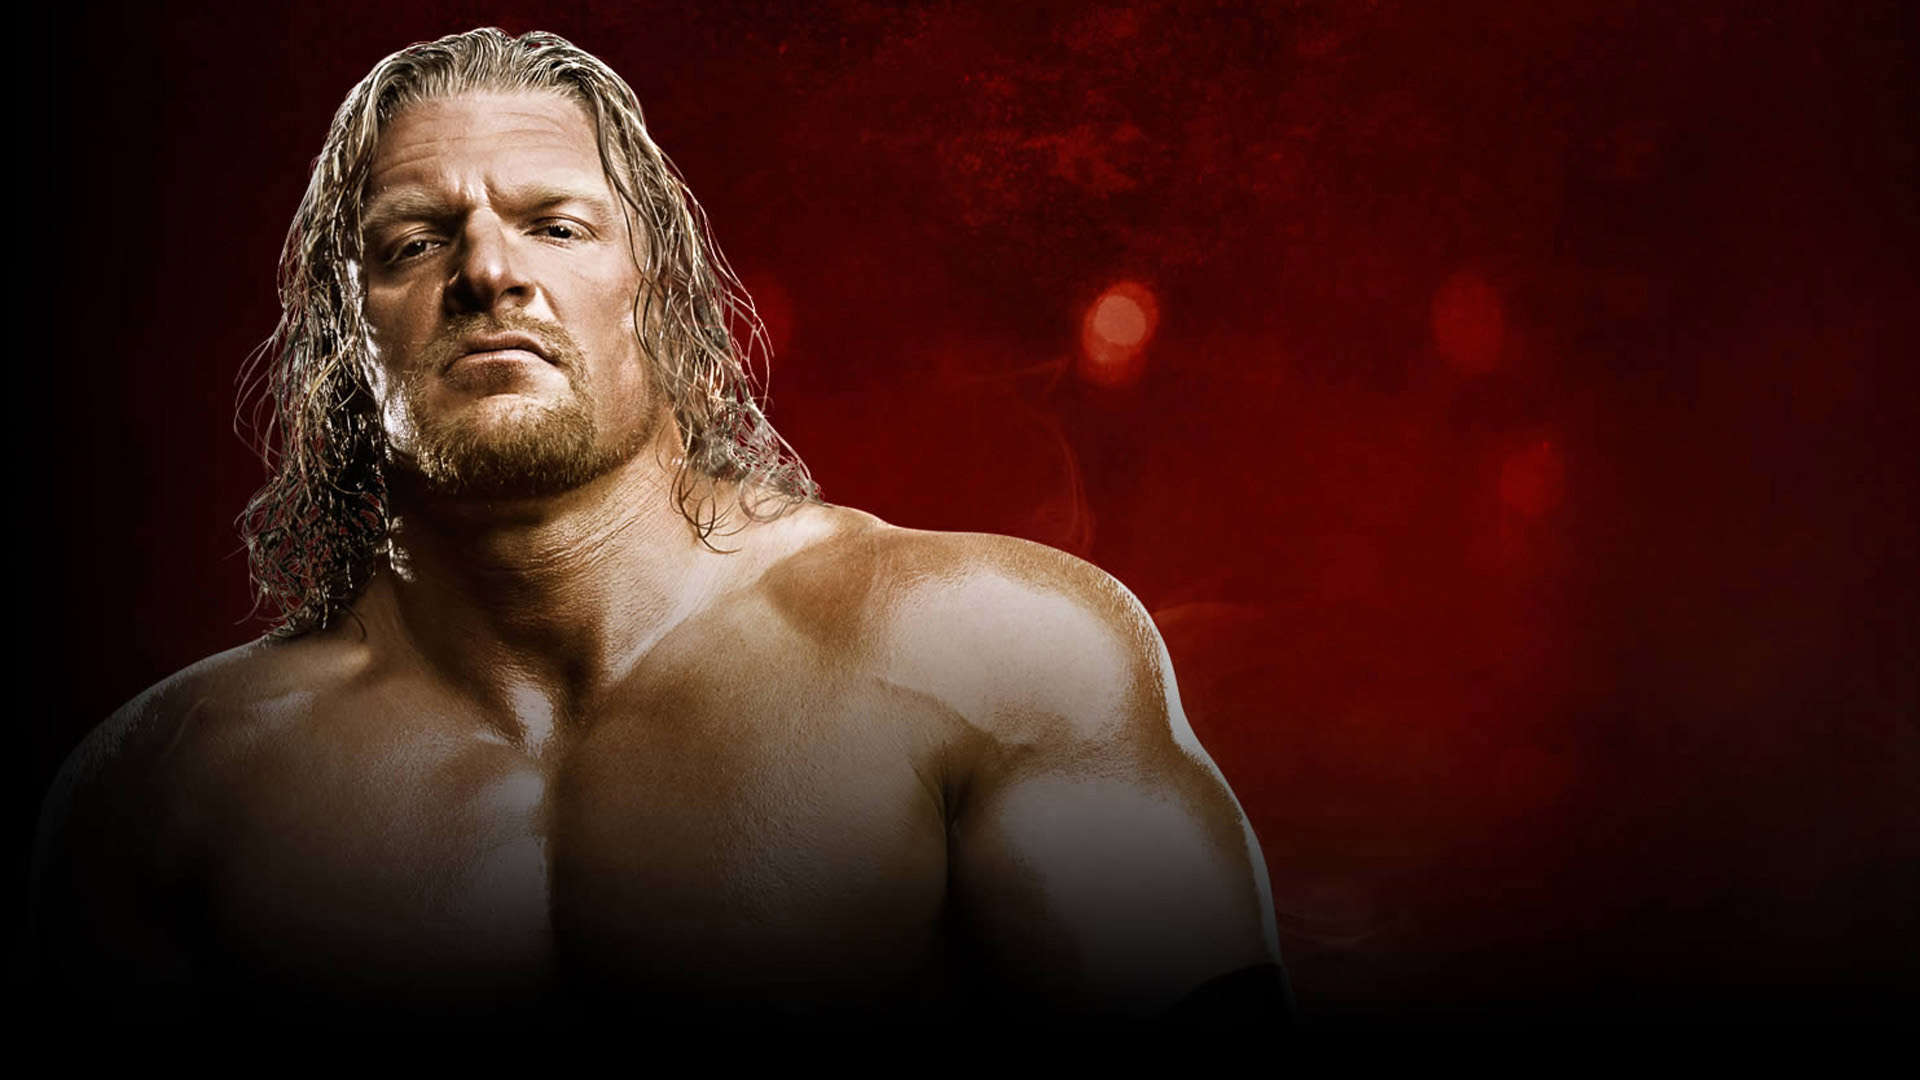 TRIPLE H WALLPAPERS FREE Wallpapers Background images